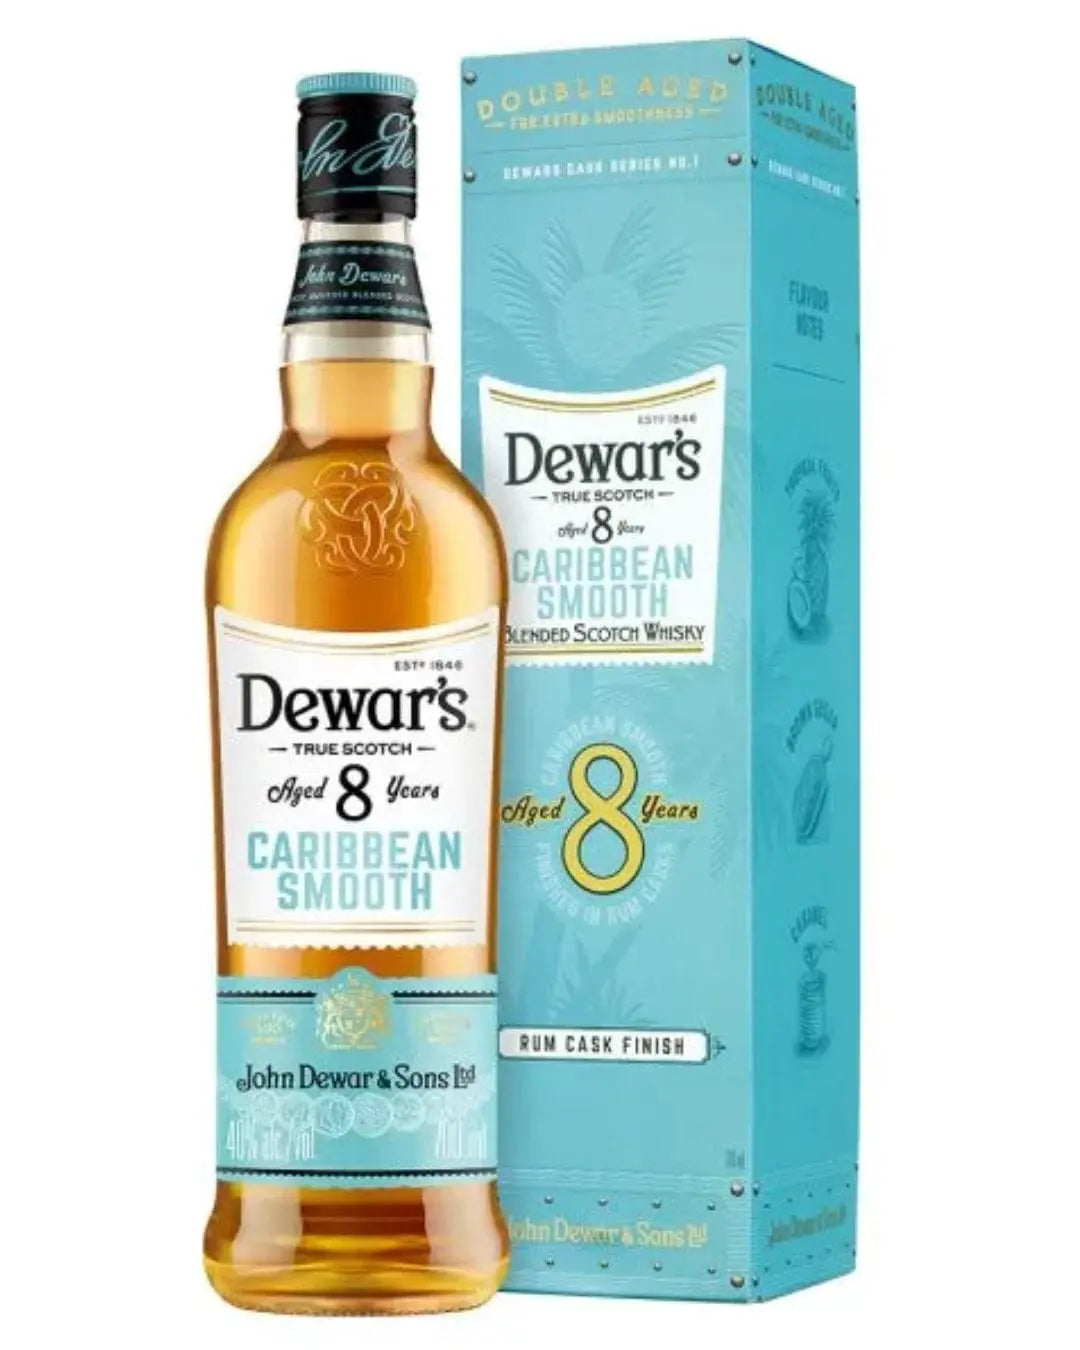 Dewars Caribbean Smooth 8 Year Old Blended Scotch Whisky, 70 cl Whisky 07640171037790